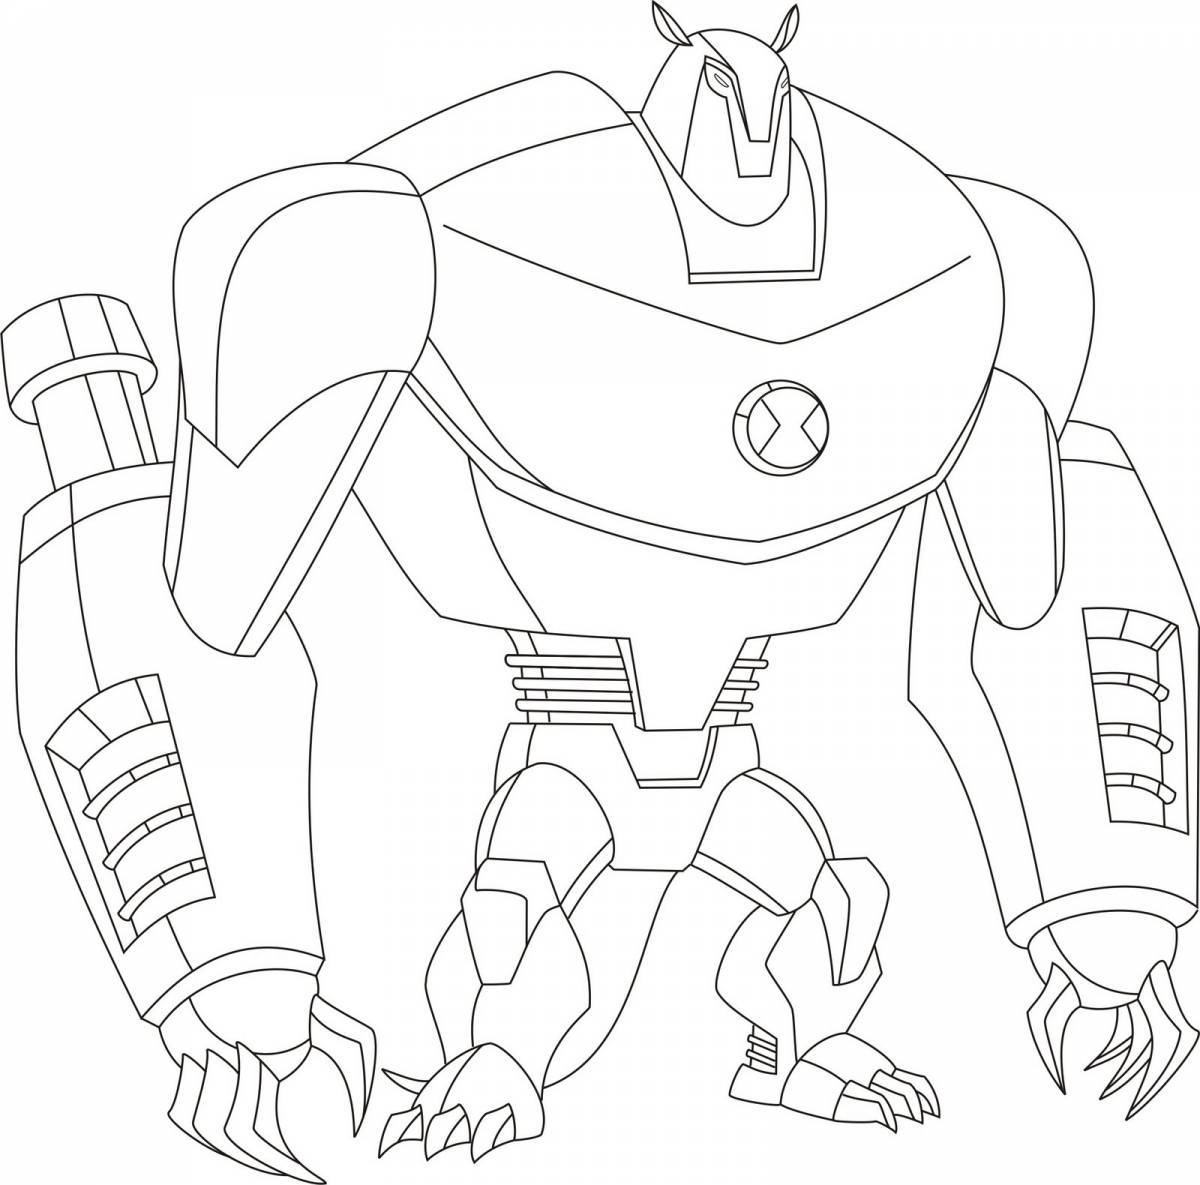 Witty ben 10 coloring book